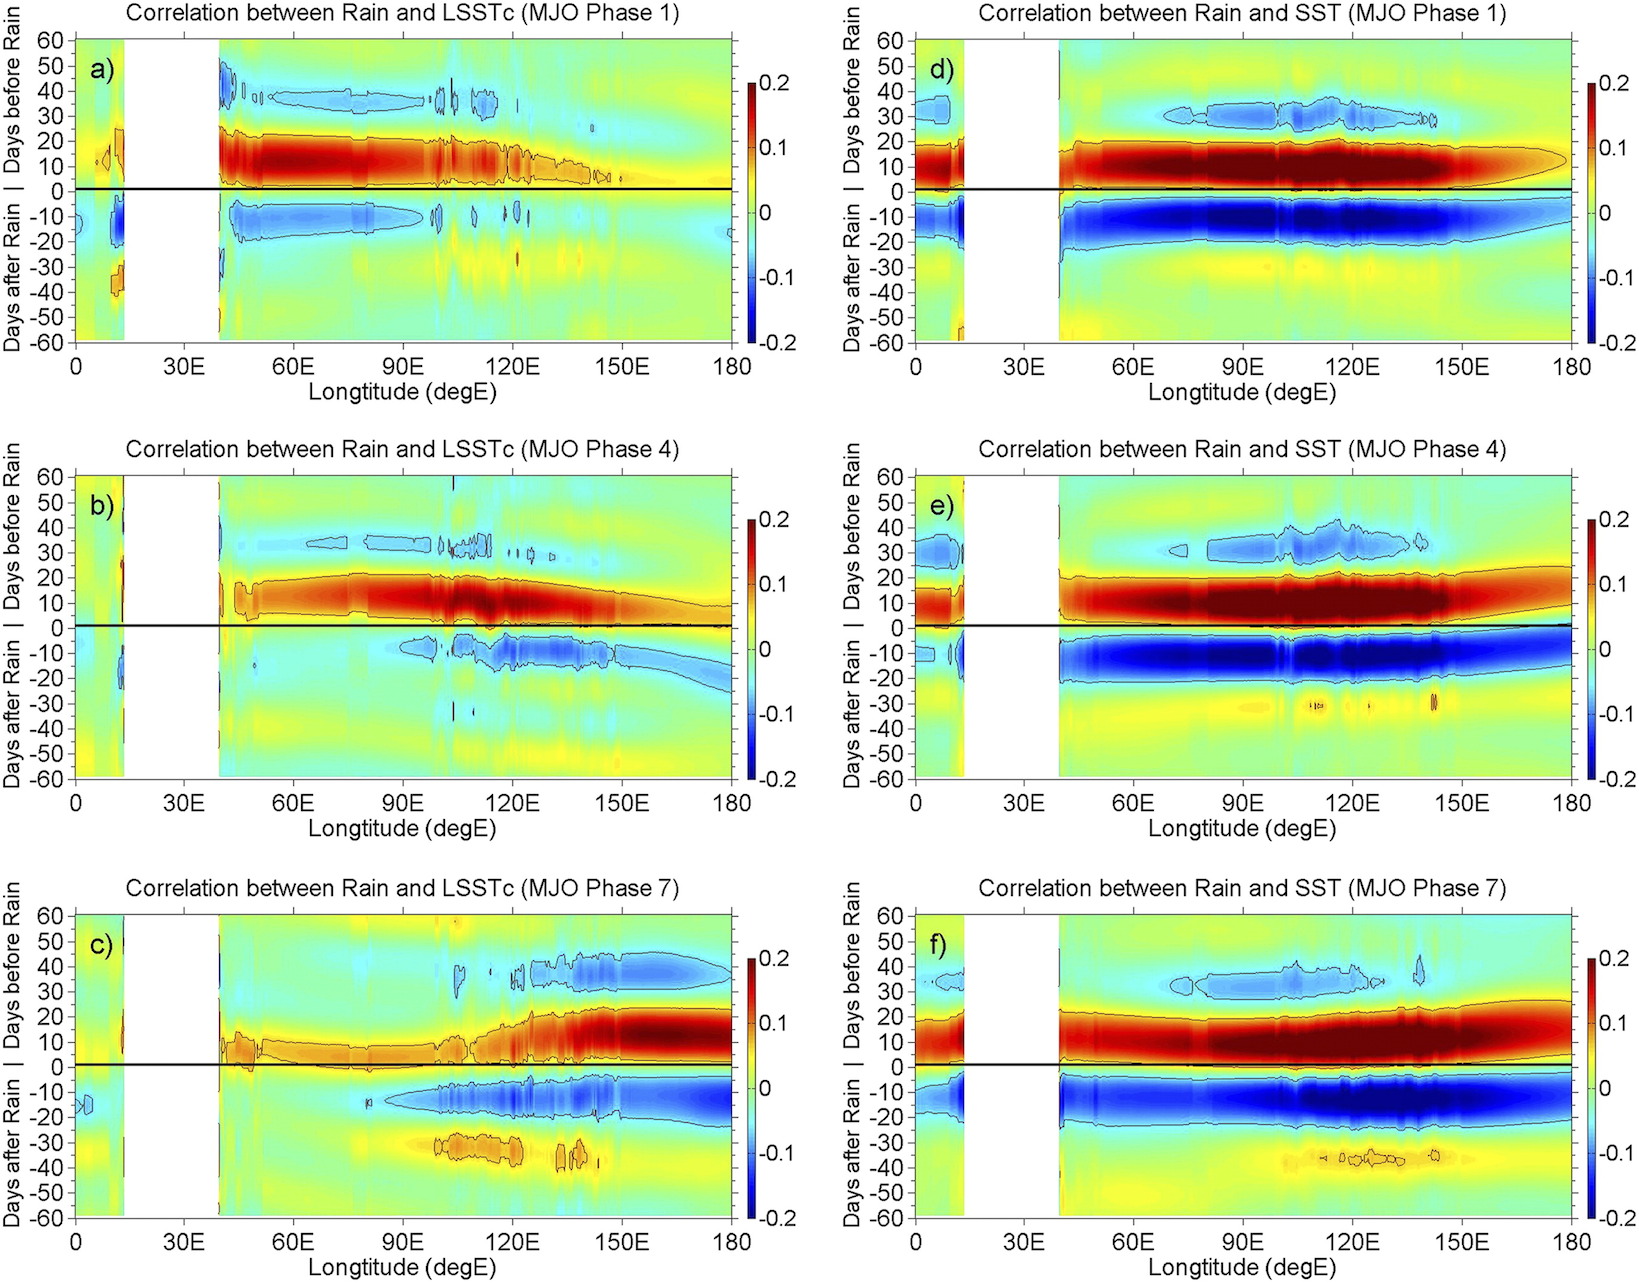 Tropical Oceanic Rainfall and Sea Surface Temperature Structure: Parsing Causation from Correlation in the MJO